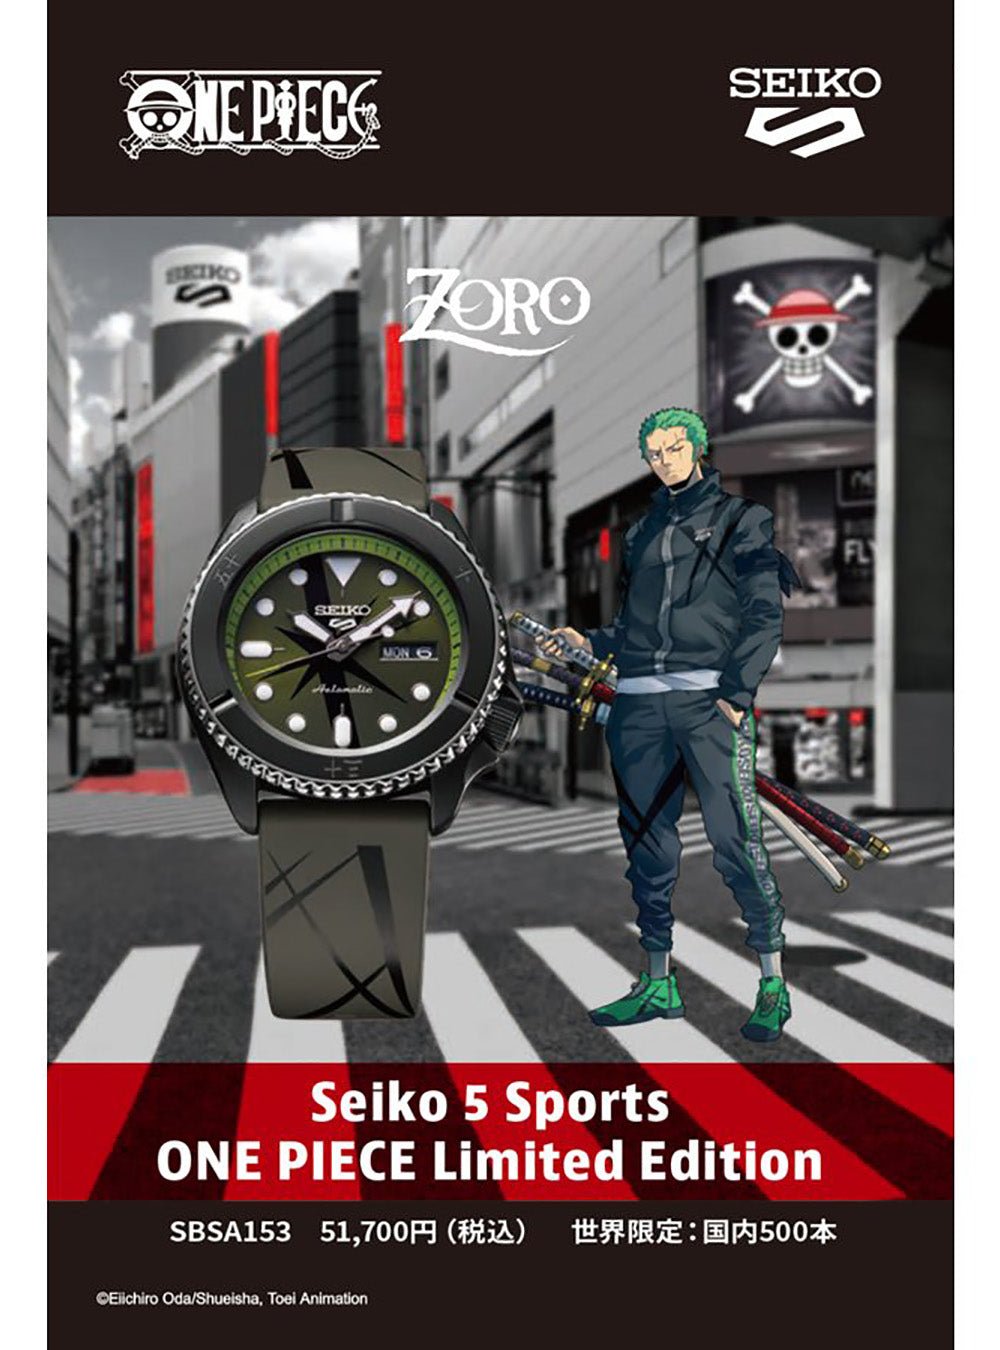 SEIKO 5 SPORTS ONE PIECE LIMITED EDITION ZORO SBSA153 MADE IN JAPAN JDM